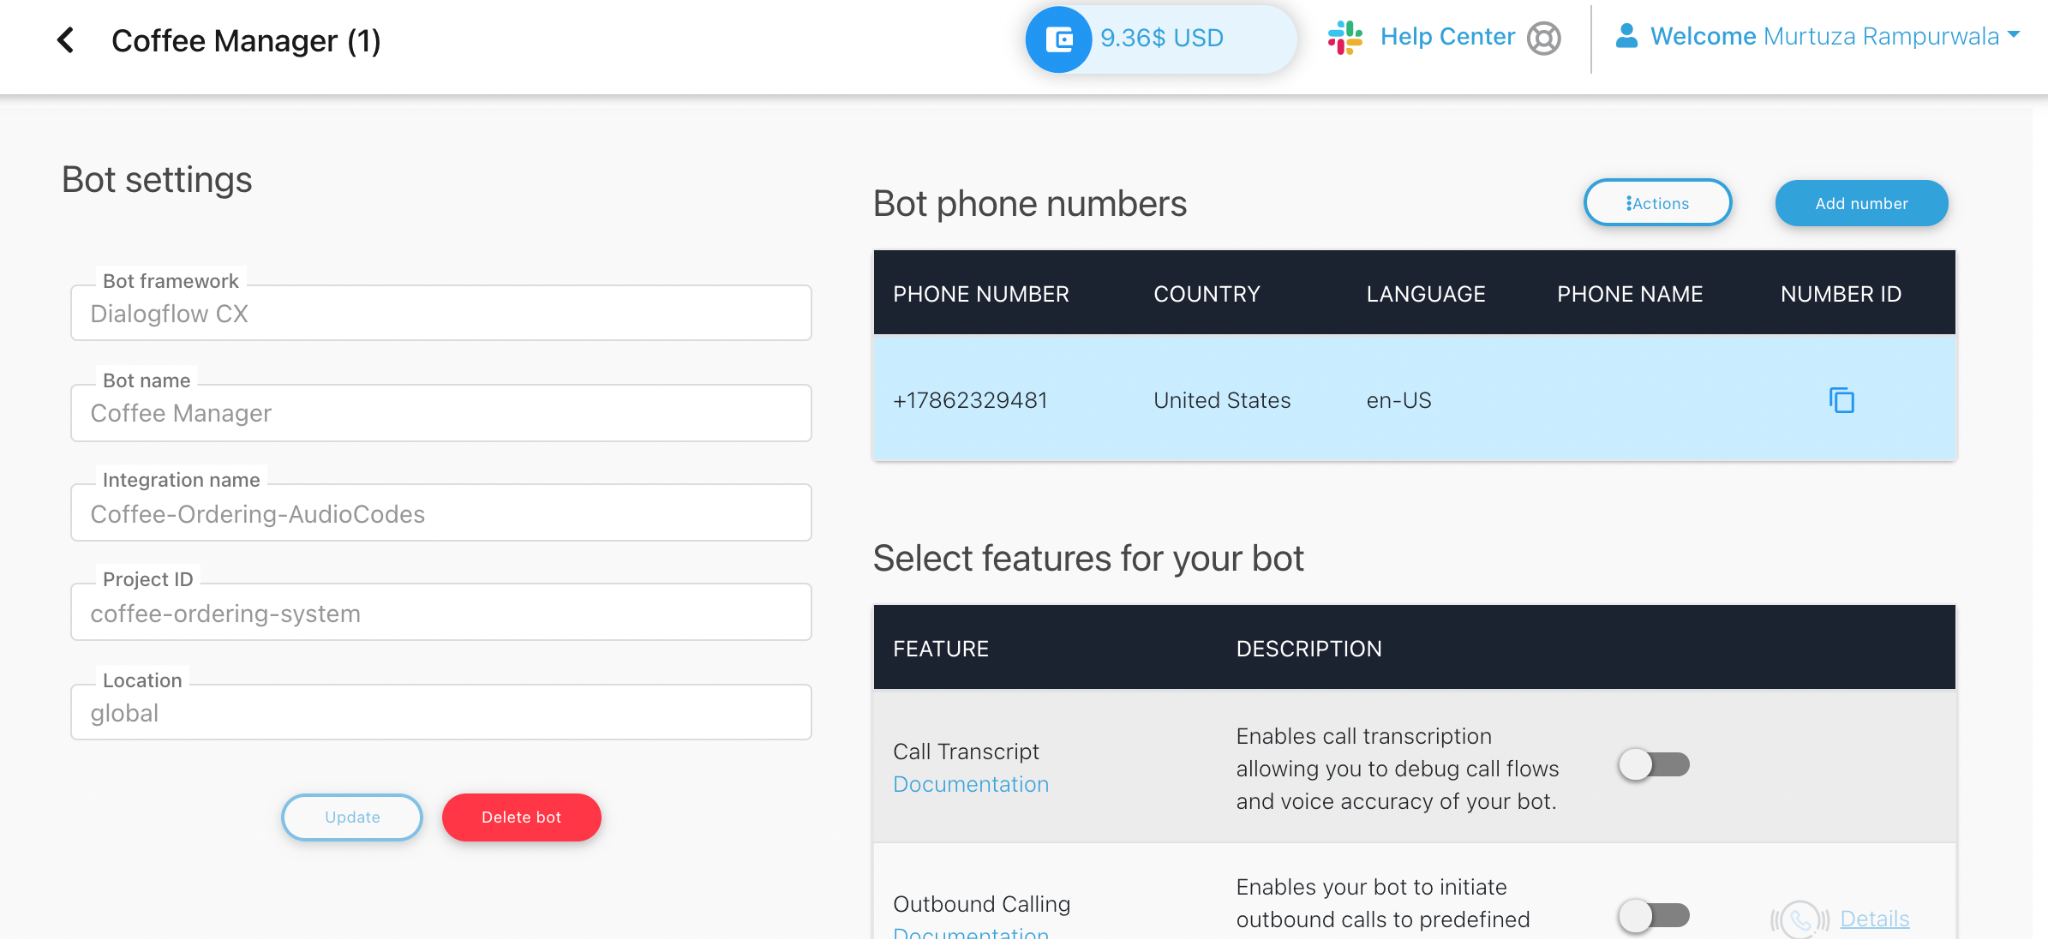 Voicebot based ordering system, Google Dialogflow, NLP, AudioCodes, connecting audiocodes, audiocodes with dialogflow, Final output of Voicebot, Voicebot ordering system